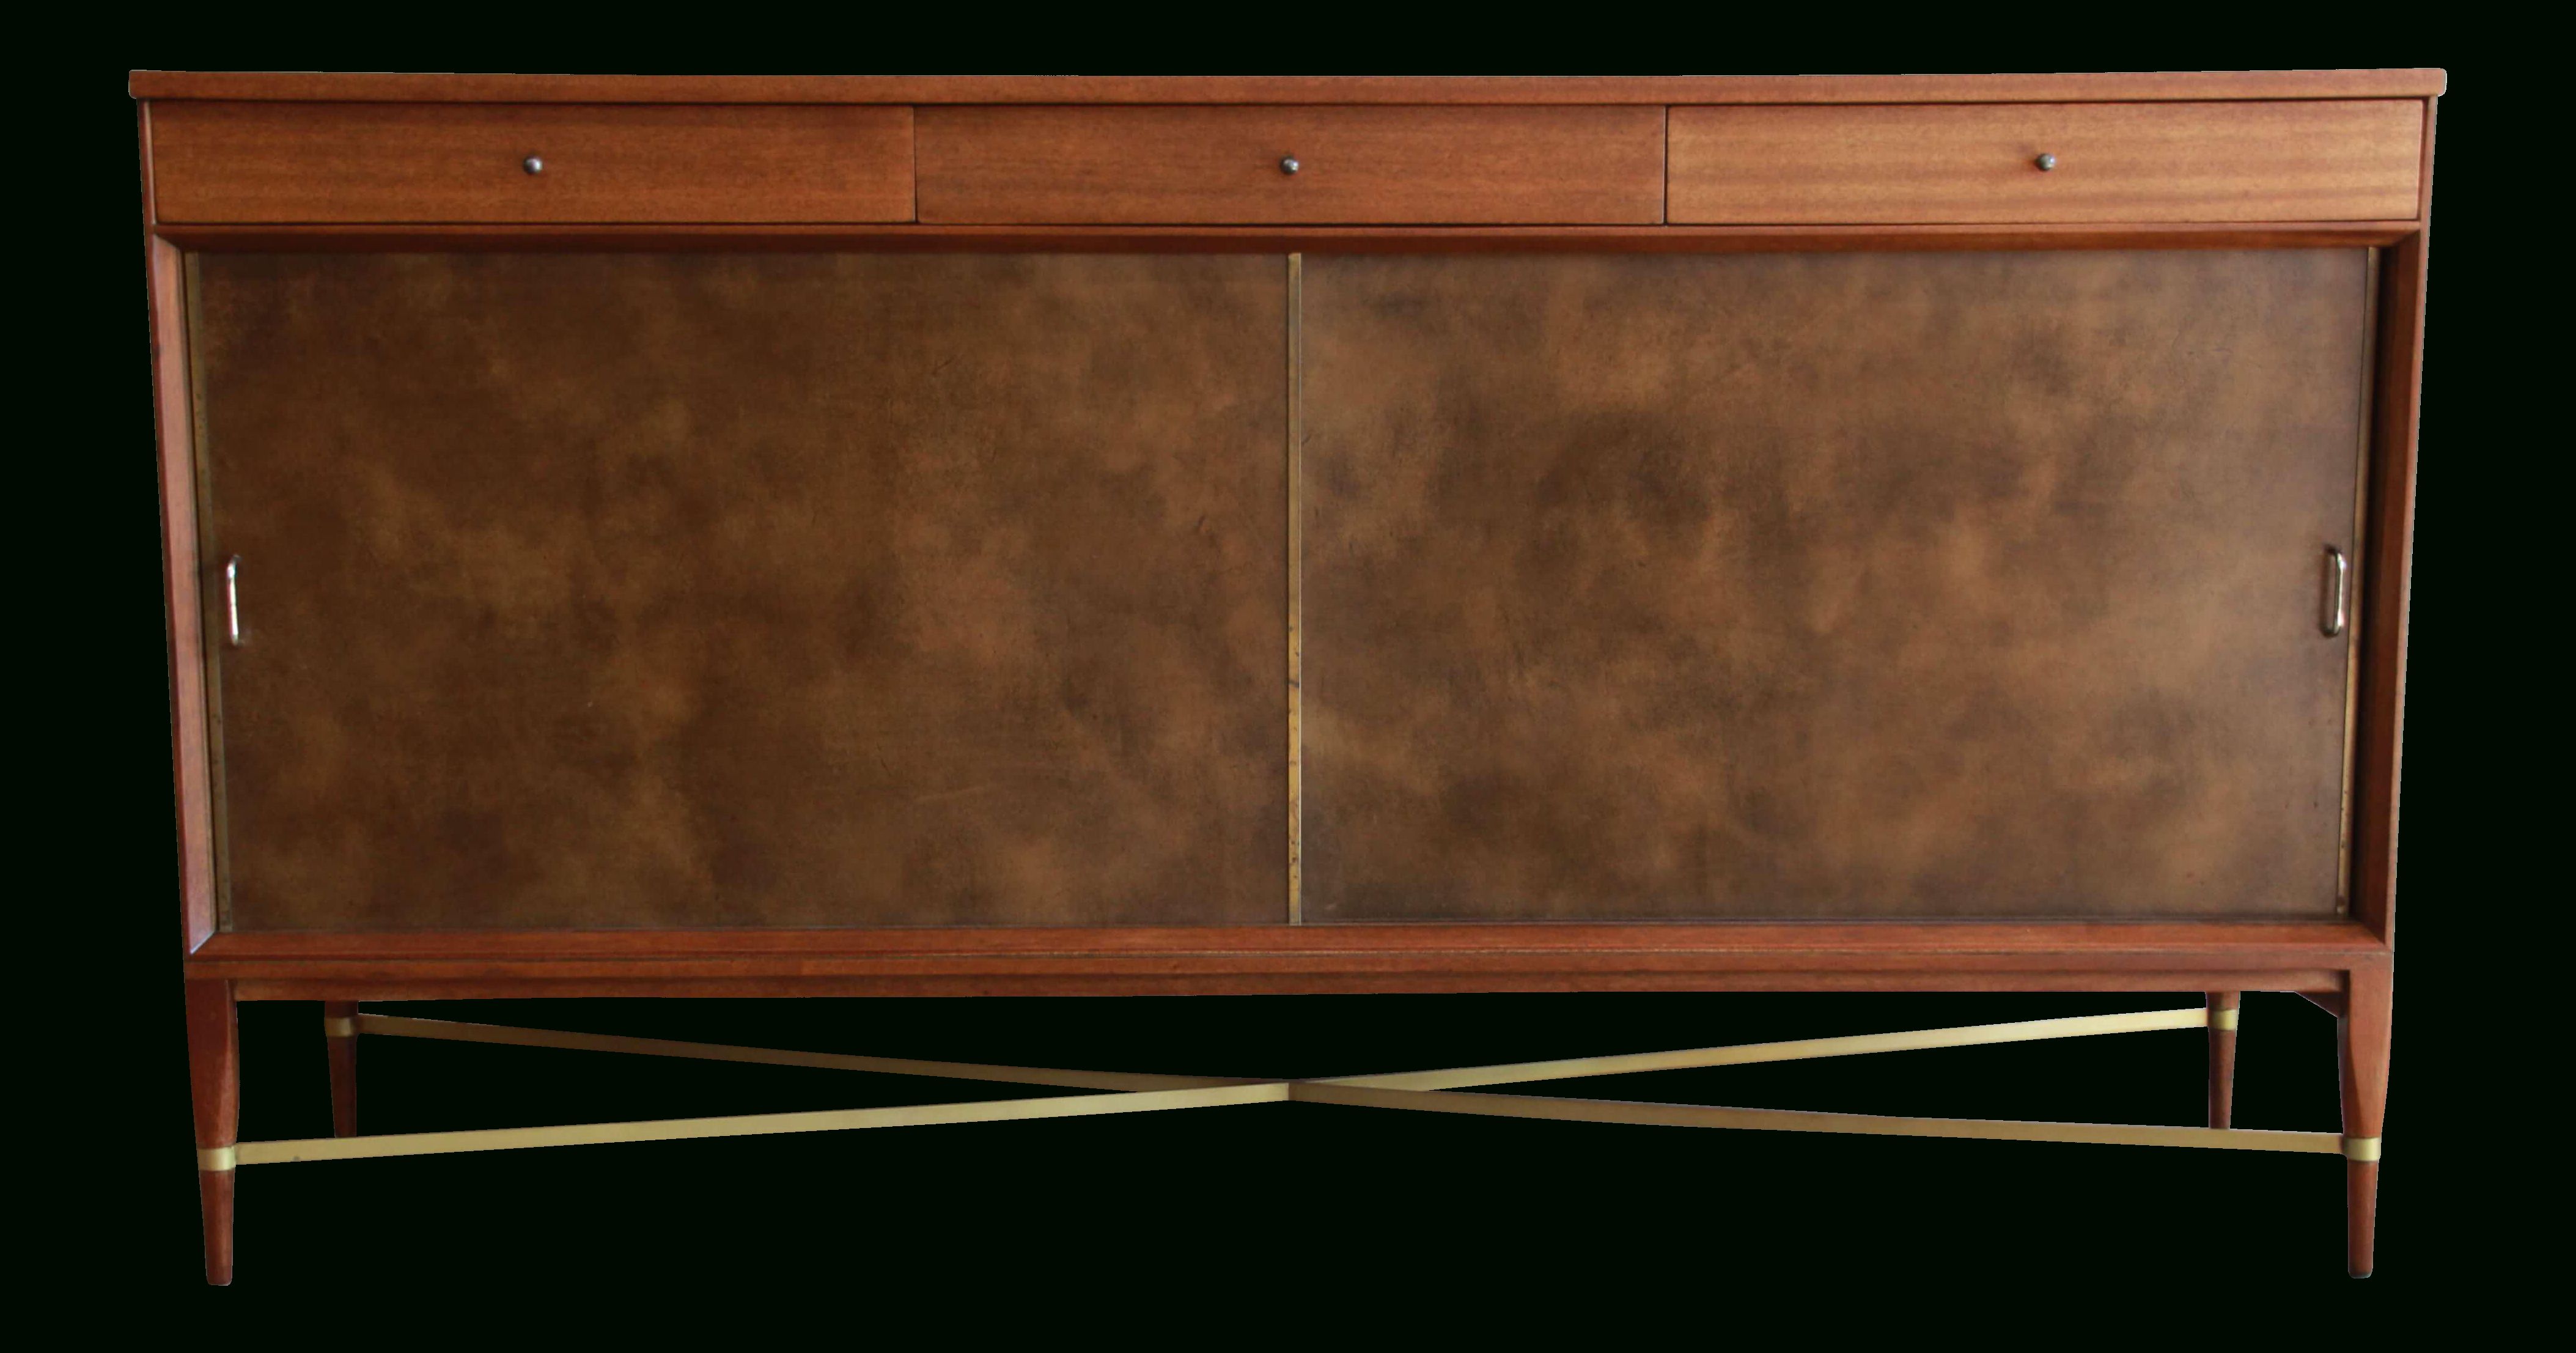 Paul Mccobb Credenza Or Sideboard For Calvin Furniture With Regard To Southwestern Credenzas (View 4 of 20)